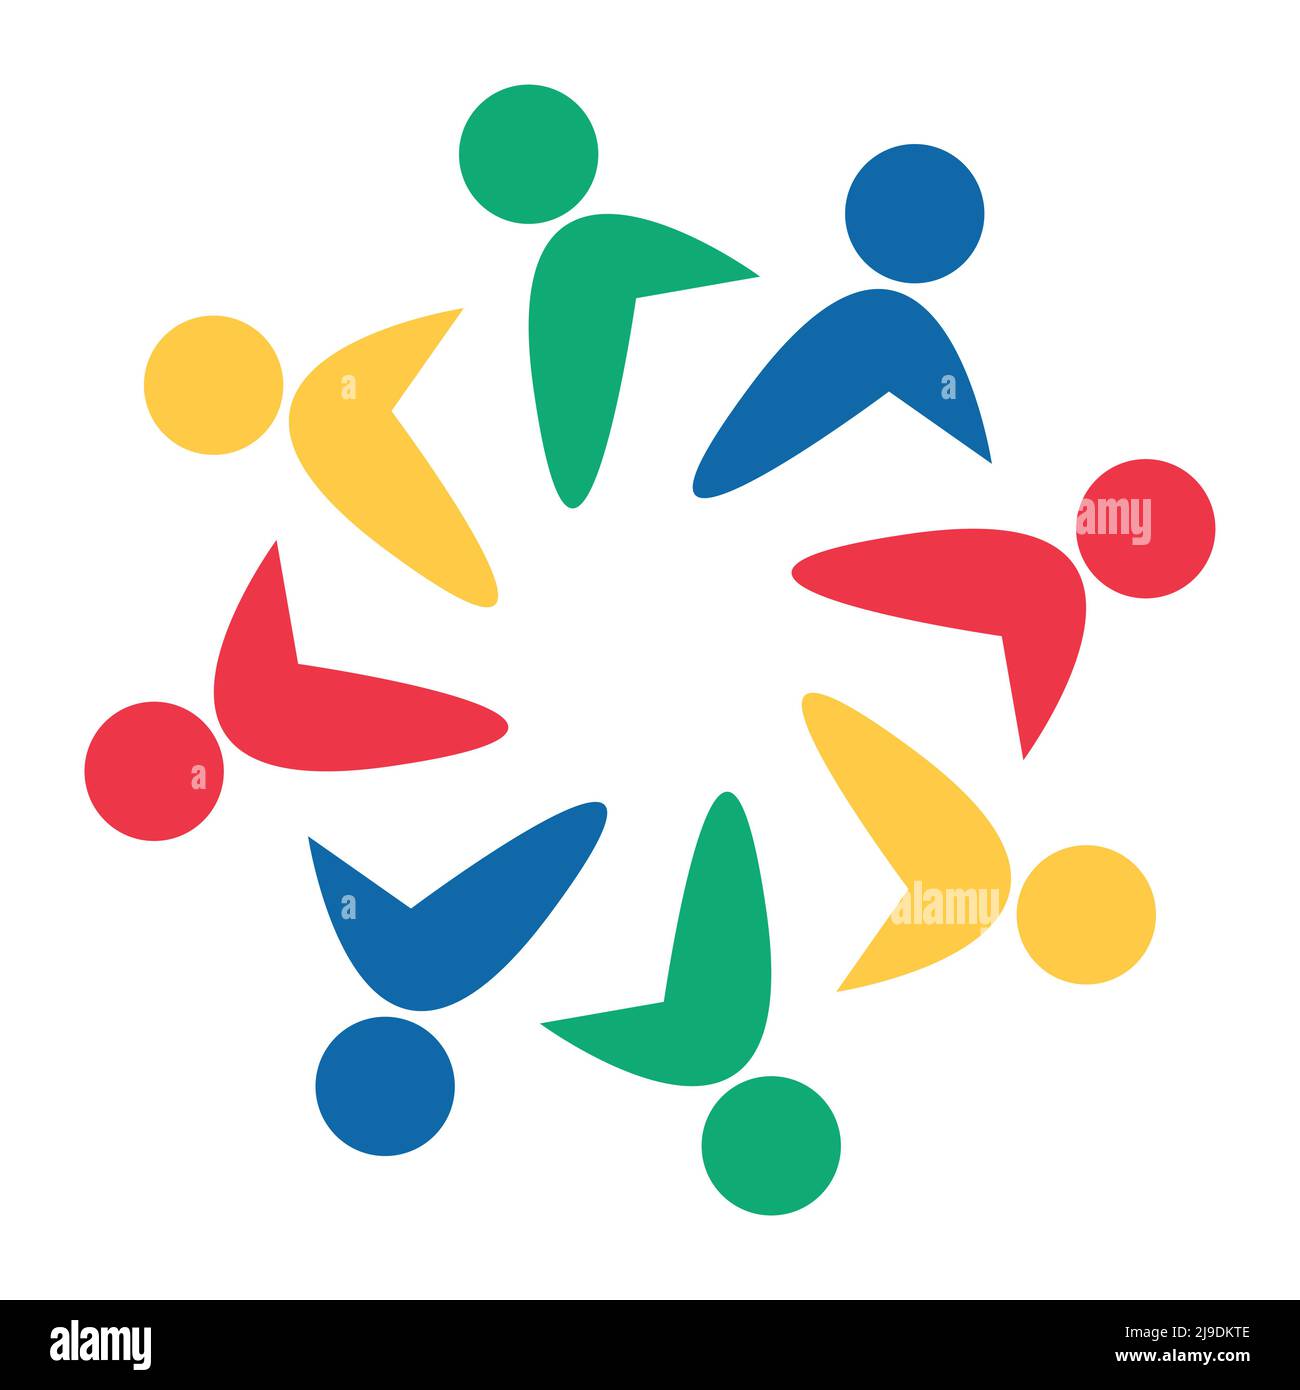 Vector graphic group connection logo.Eight people in the circle.logo team work Stock Vector